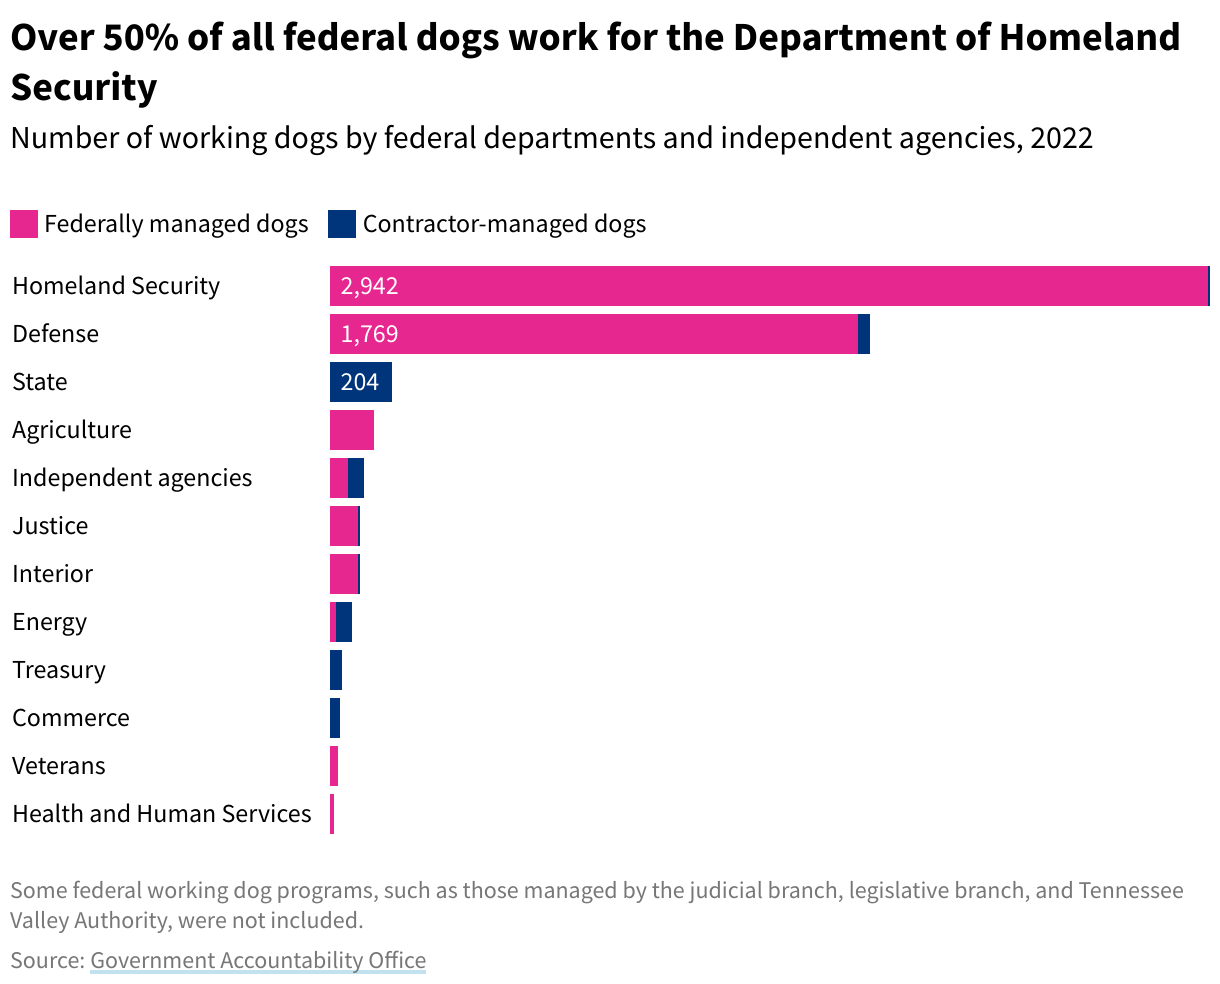 Bar chart showing federally managed and contractor managed dogs. Homeland Security and Defense have by far the most dogs. Homeland security had 2942 federally managed and 1 contractor managed dog. Defense had 1769 federally managed dogs and 39 contractor managed dogs. State department was third highest with 204 contractor managed dogs and 0 federally managed dogs.